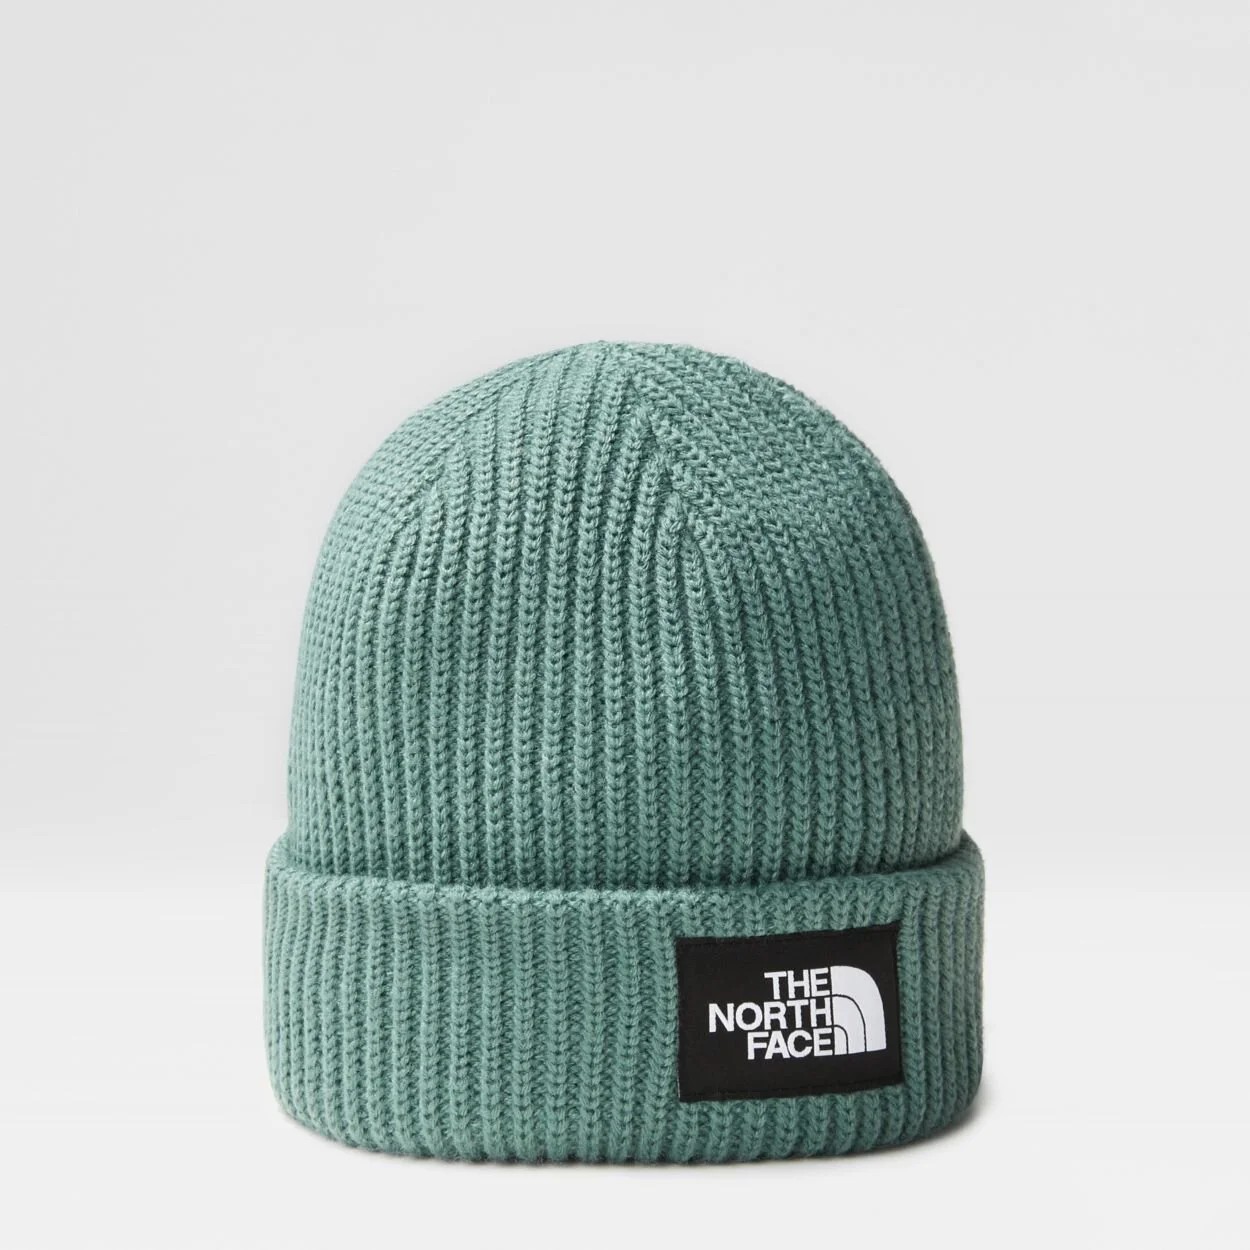 The North Face Salty Lined Beanie - Dark Sage